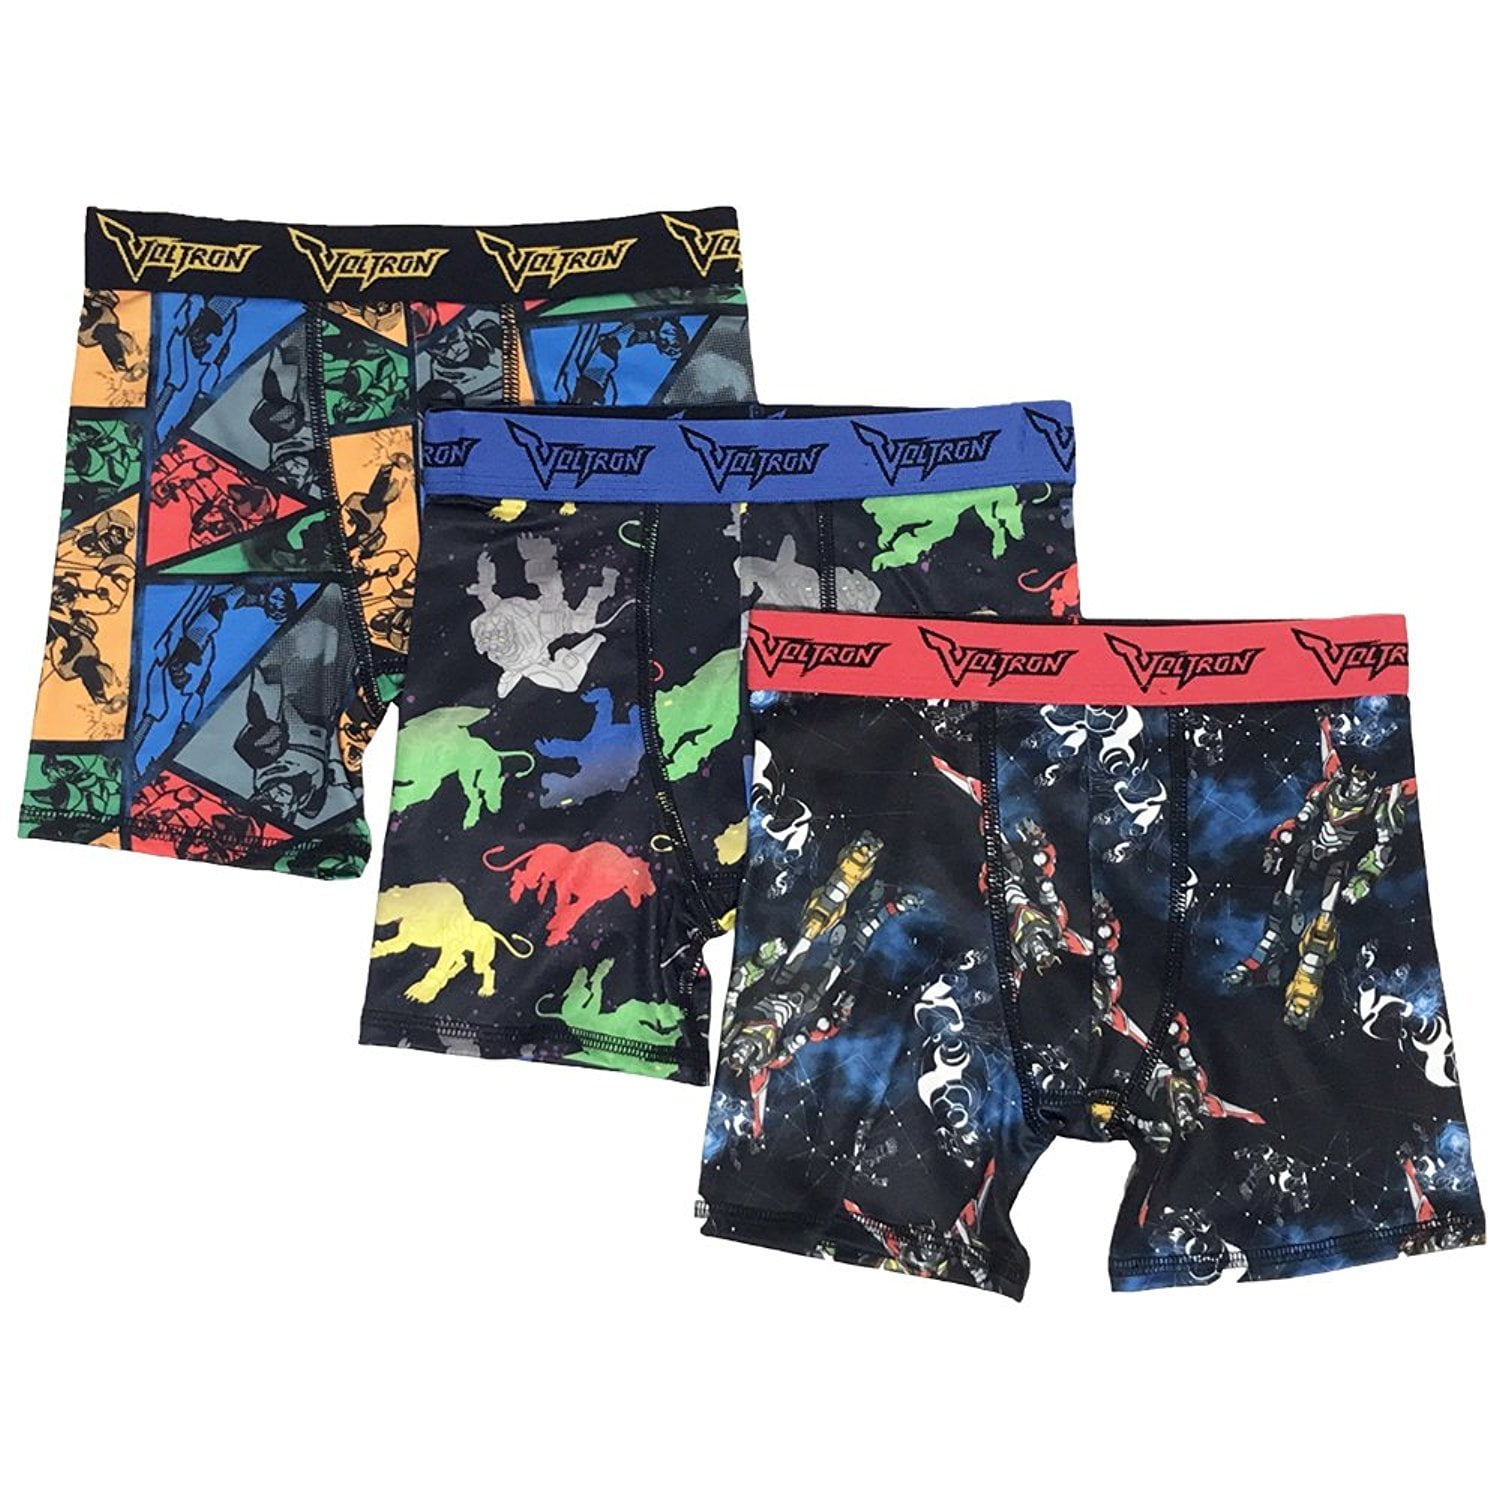 Universal Textiles Childrens Boys Contrast Band Design Trunks/Boxer Shorts Underwear Pack of 3